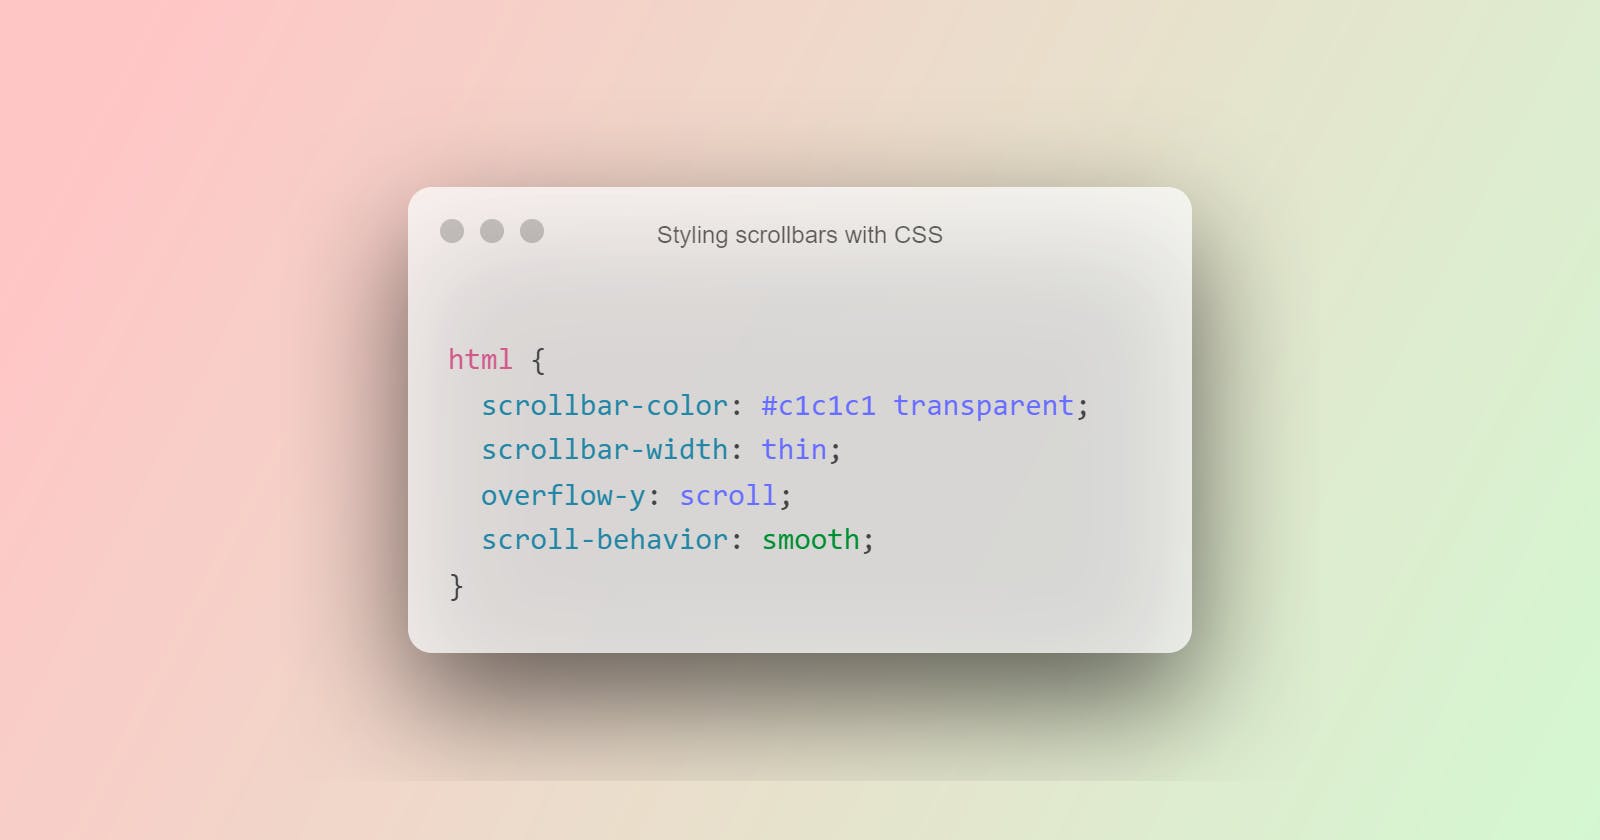 Styling scrollbars with CSS